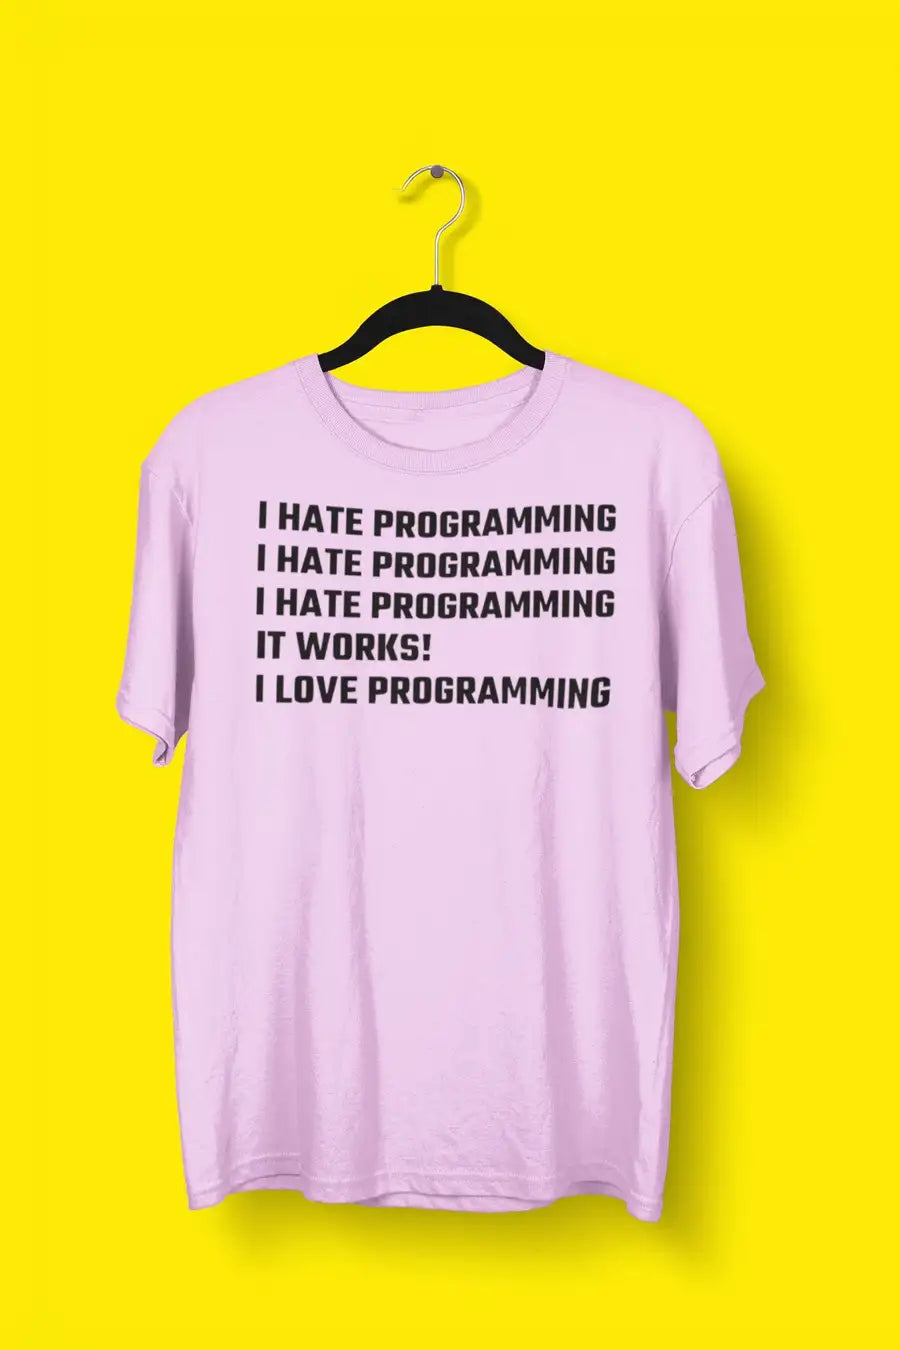 I Hate Programming / I Love Programming Coding T Shirts | Premium Design | Catch My Drift India - Catch My Drift India Clothing black, clothing, coding, engineer, engineering, made in india, 